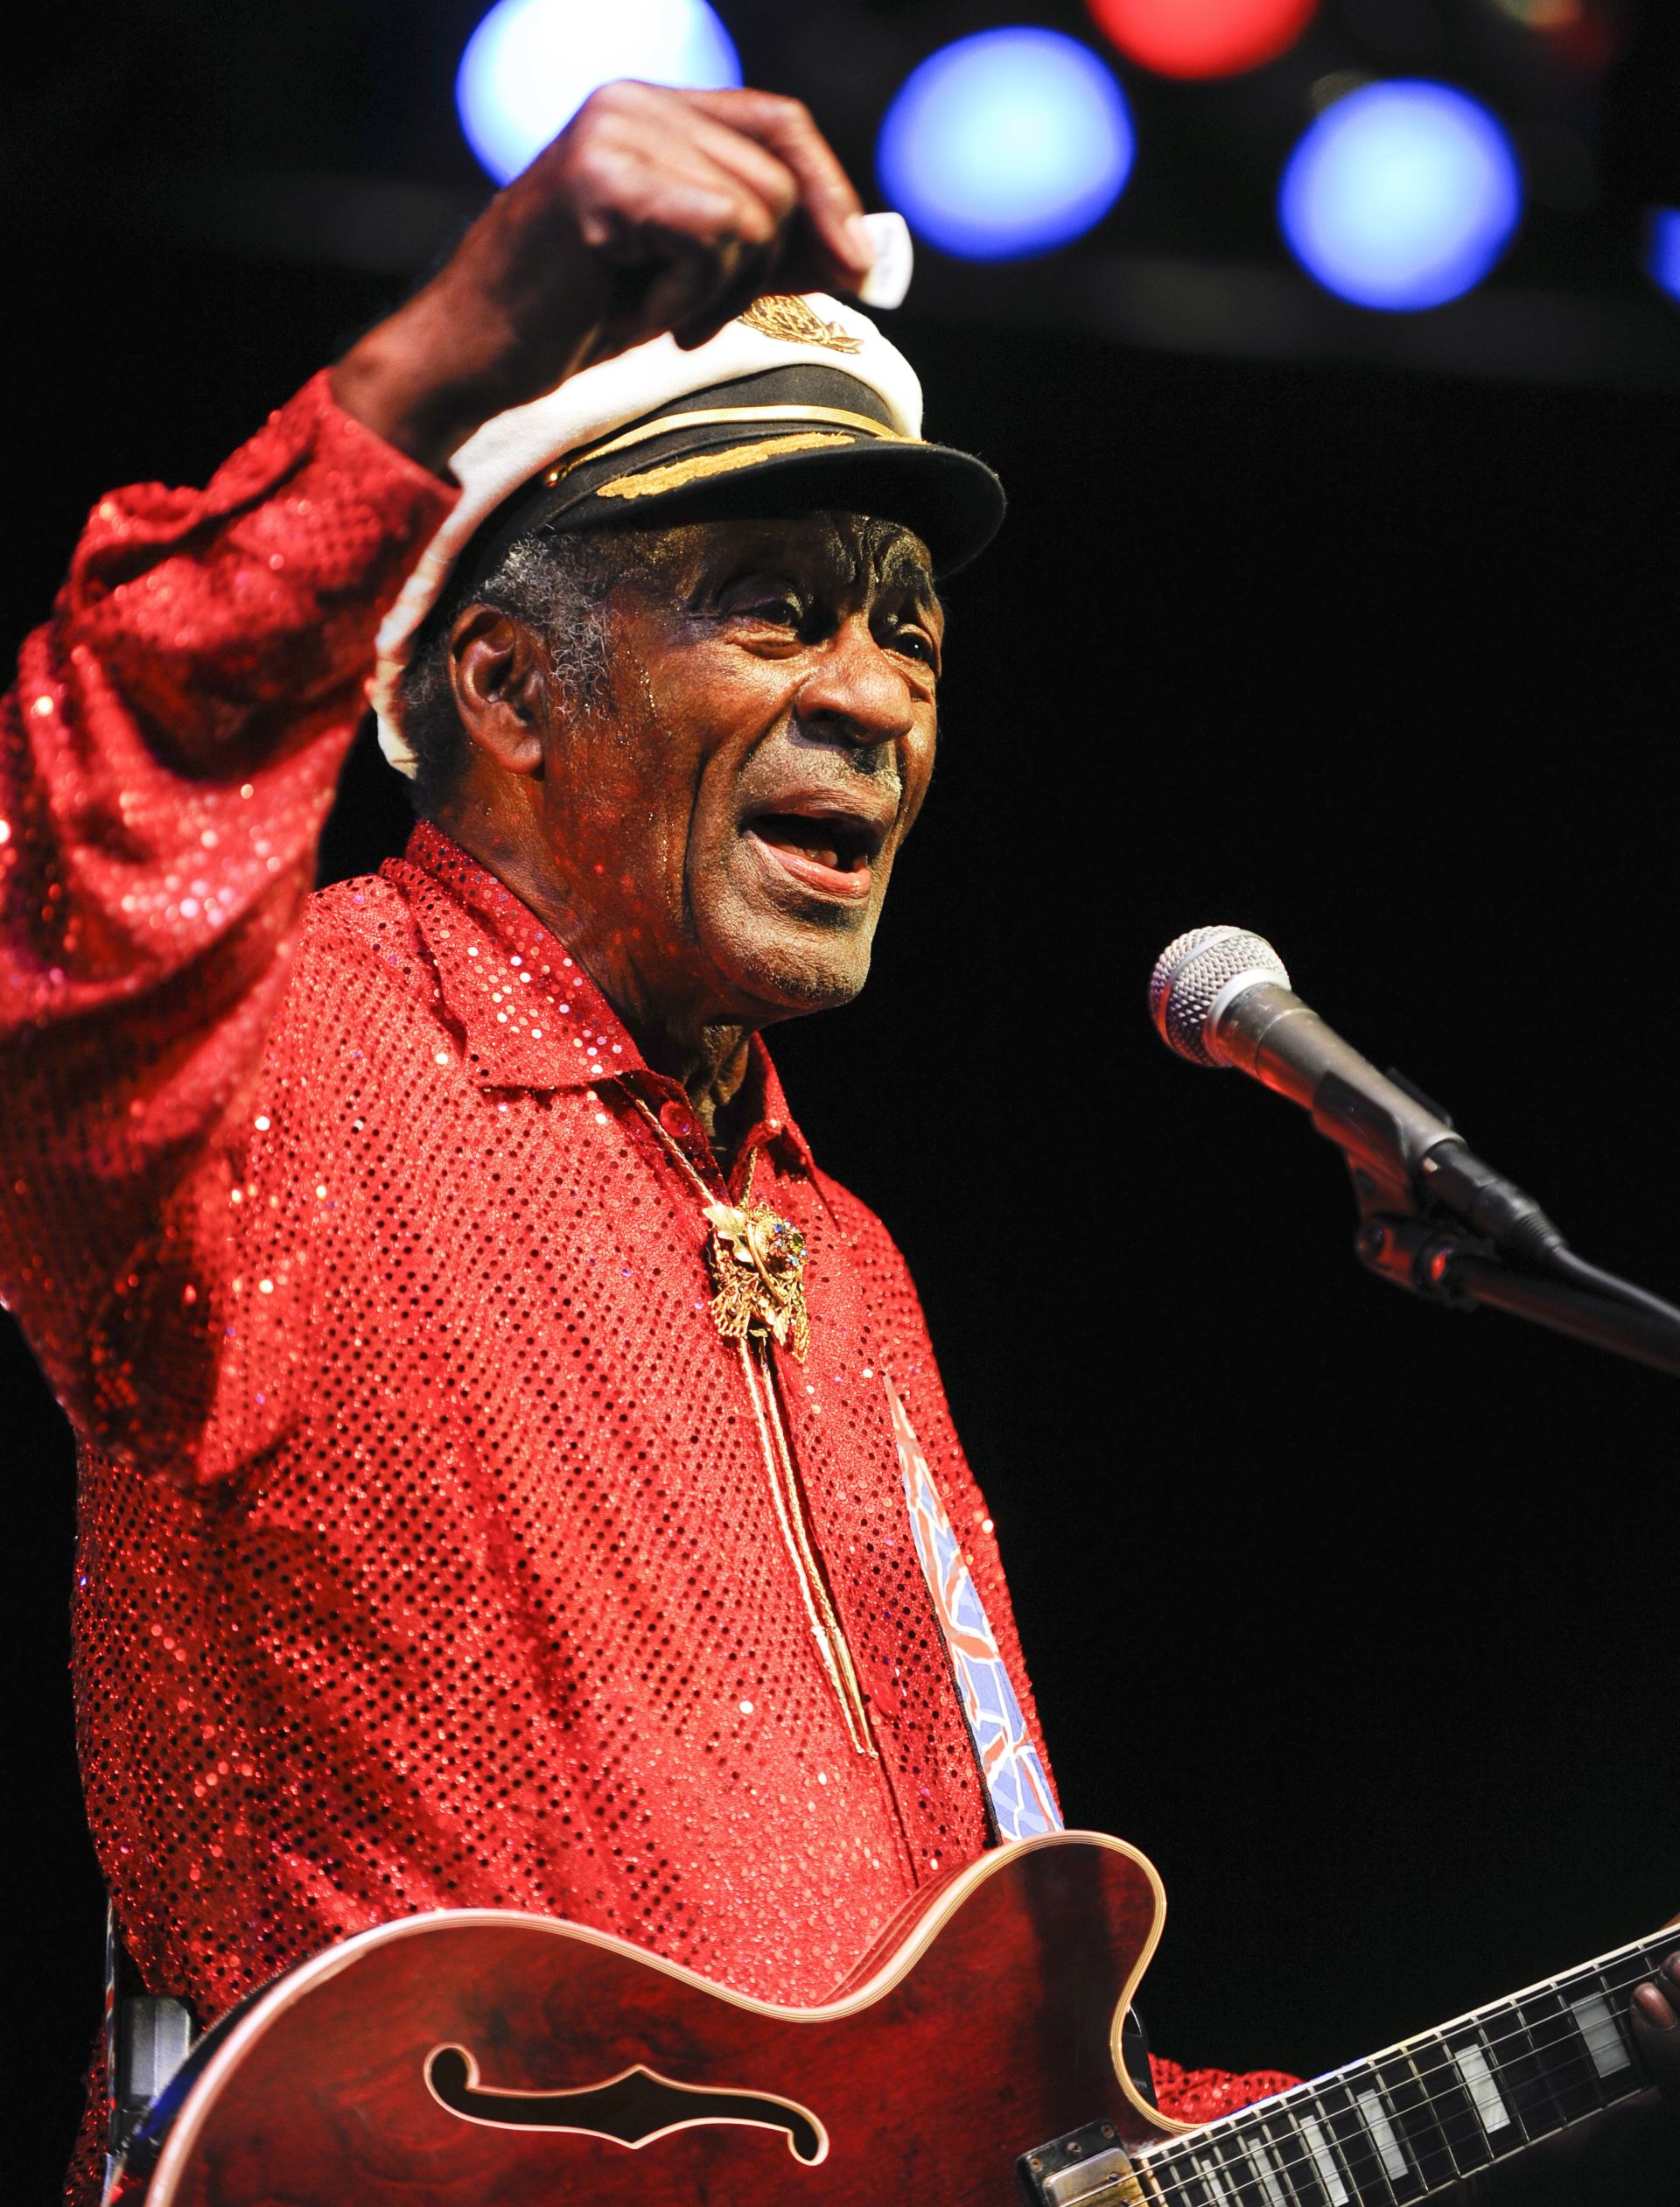 epa05857242 (FILE) A file picture dated 14 July 2009 shows US musician Chuck Berry performing at the Major League Baseball All Star Gala in St. Louis, Missouri, USA. According to a statement by the St. Charles County Police Department on 18 March 2017, Chuck Berry has died at the age of 90-years-old.  EPA/TANNEN MAURY